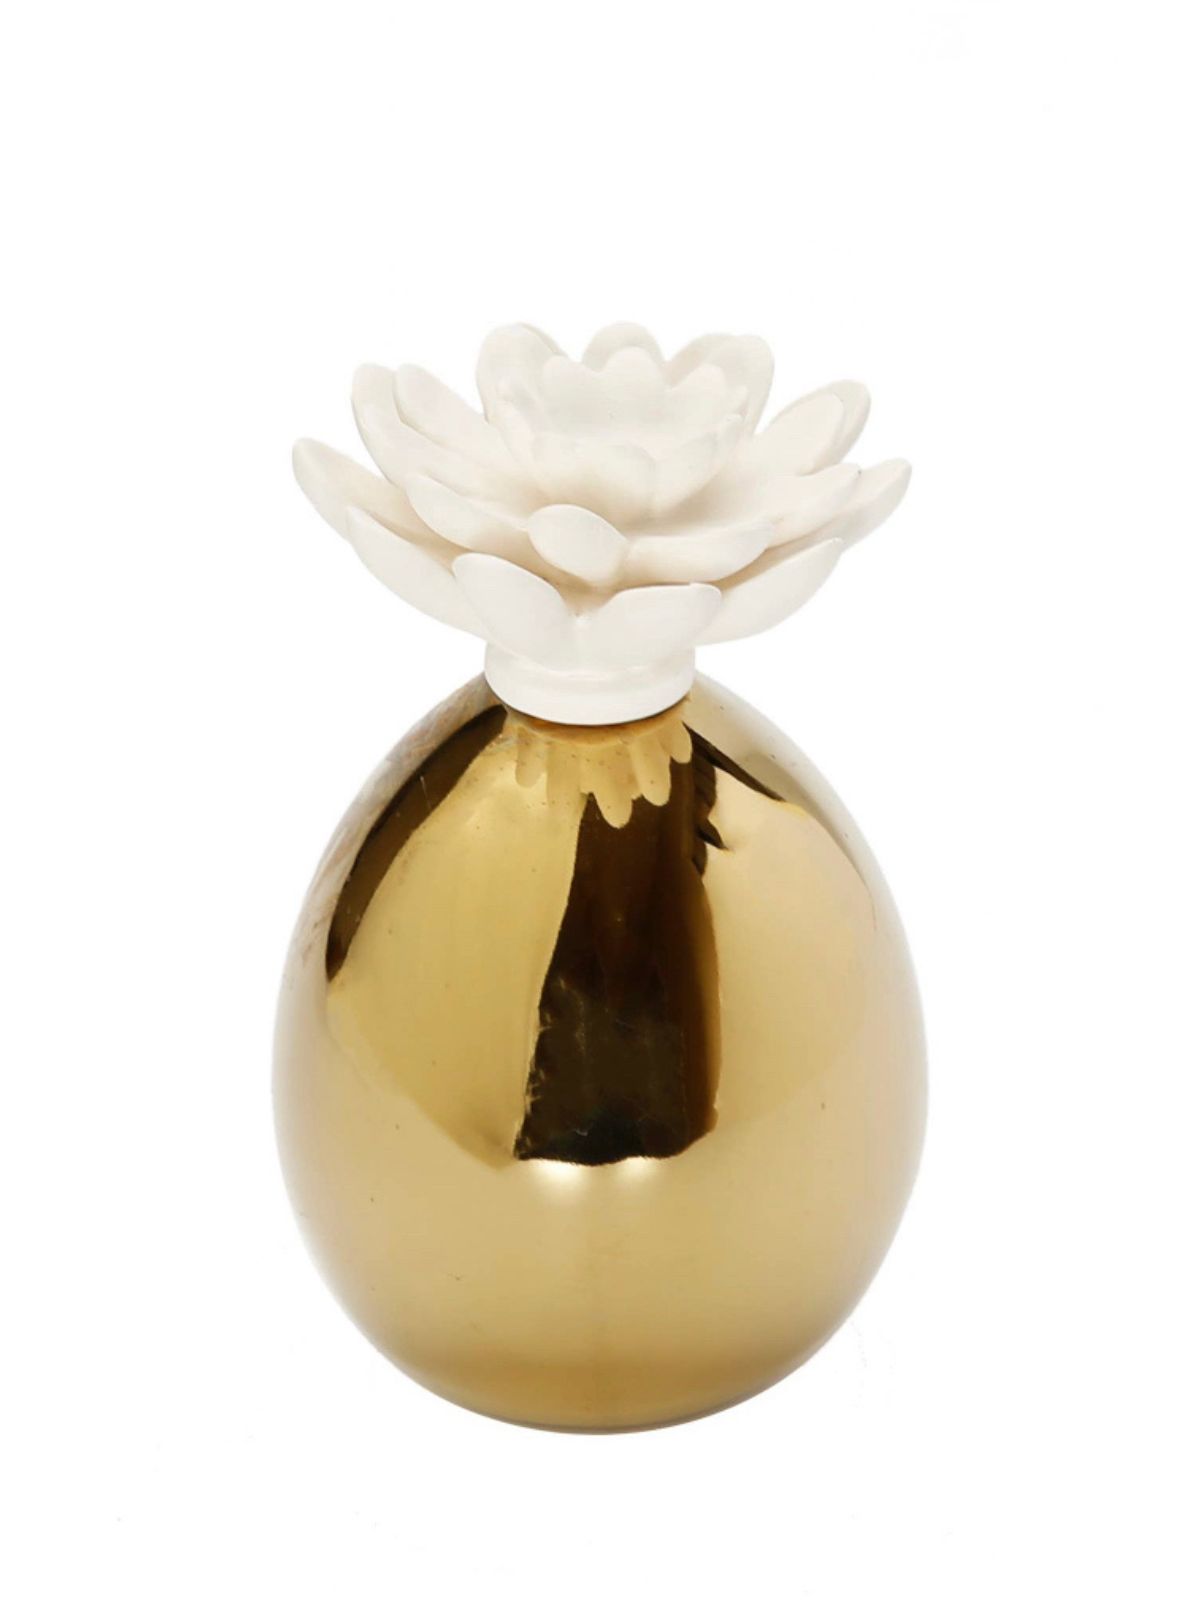 Polished Gold Oil Diffuser with White Floral Topper And Lily of the Valley Scent. 